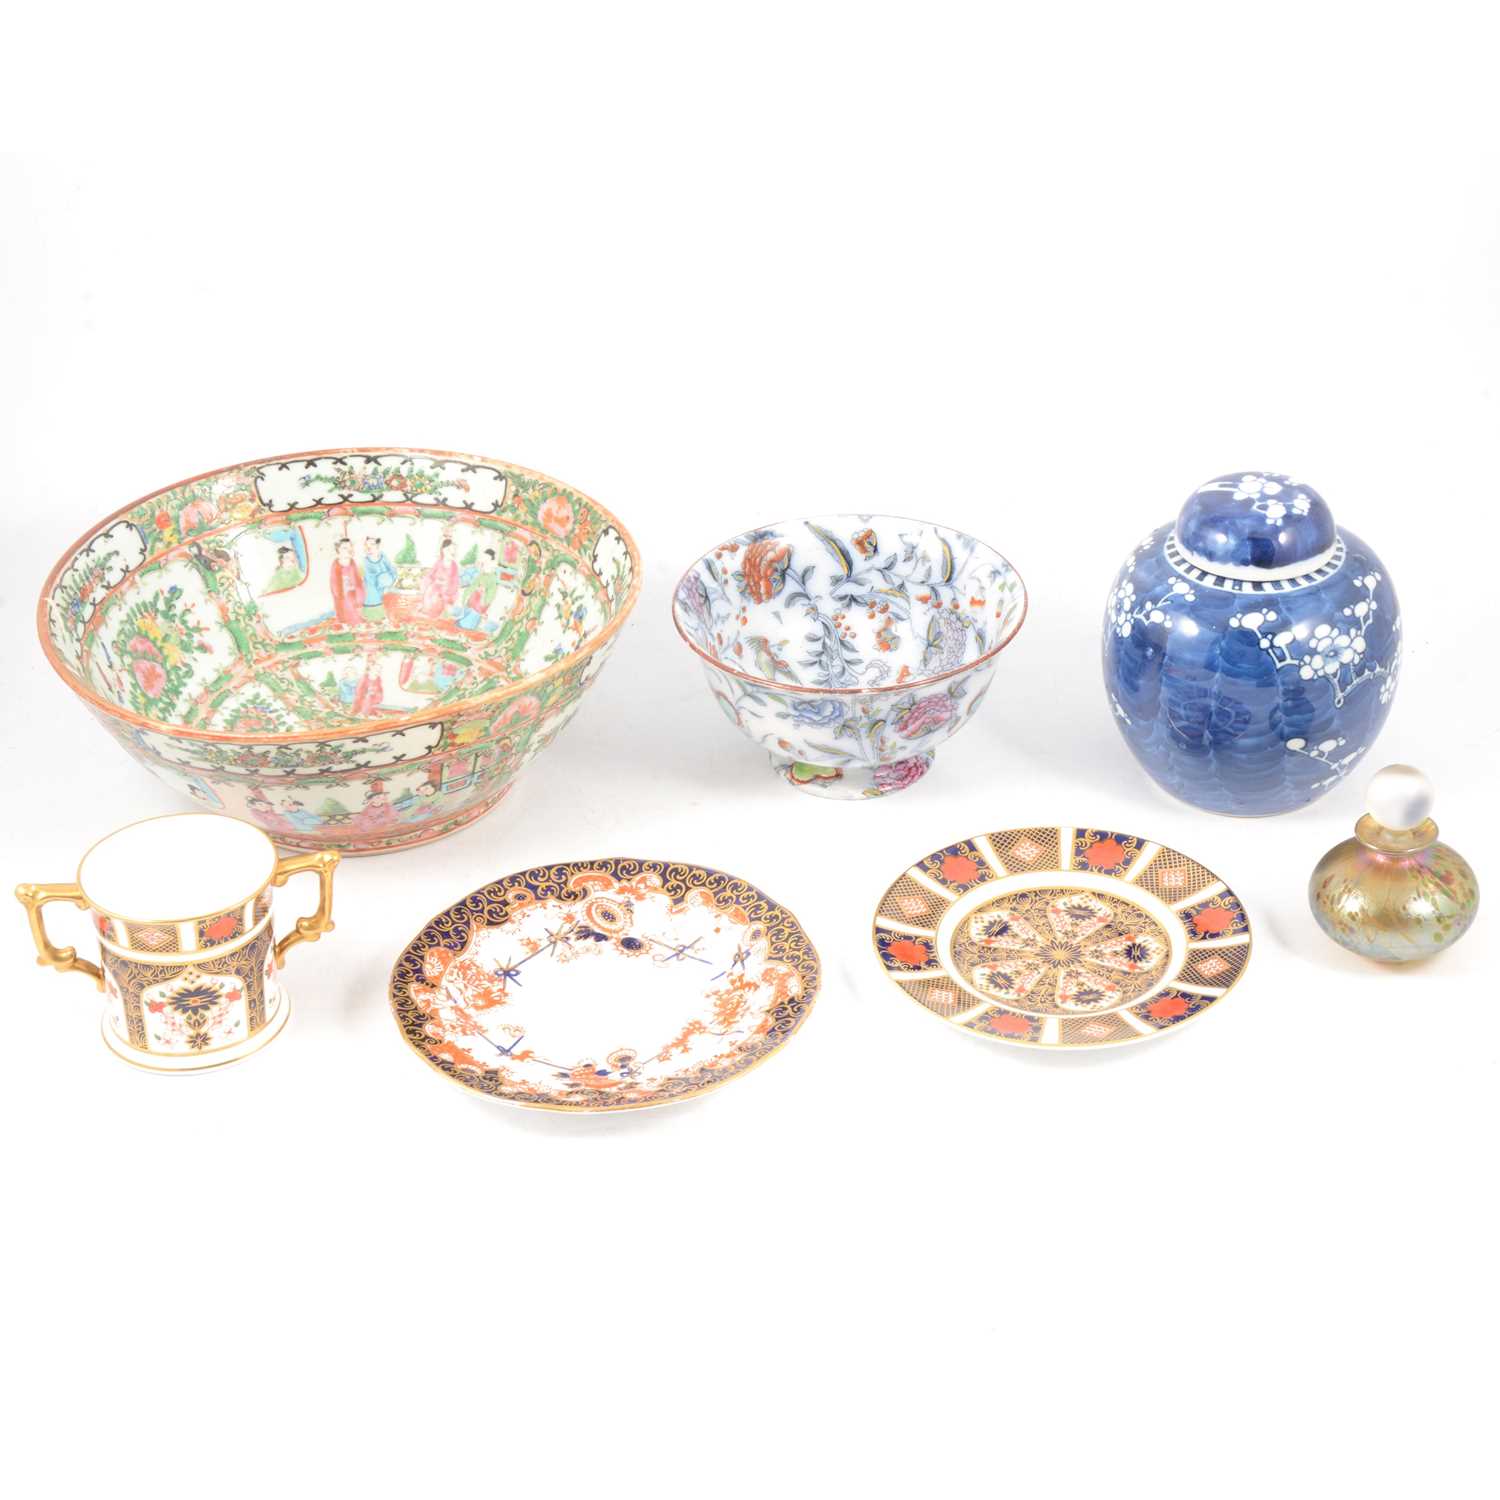 Lot 62 - Collection of decorative ceramics and glass